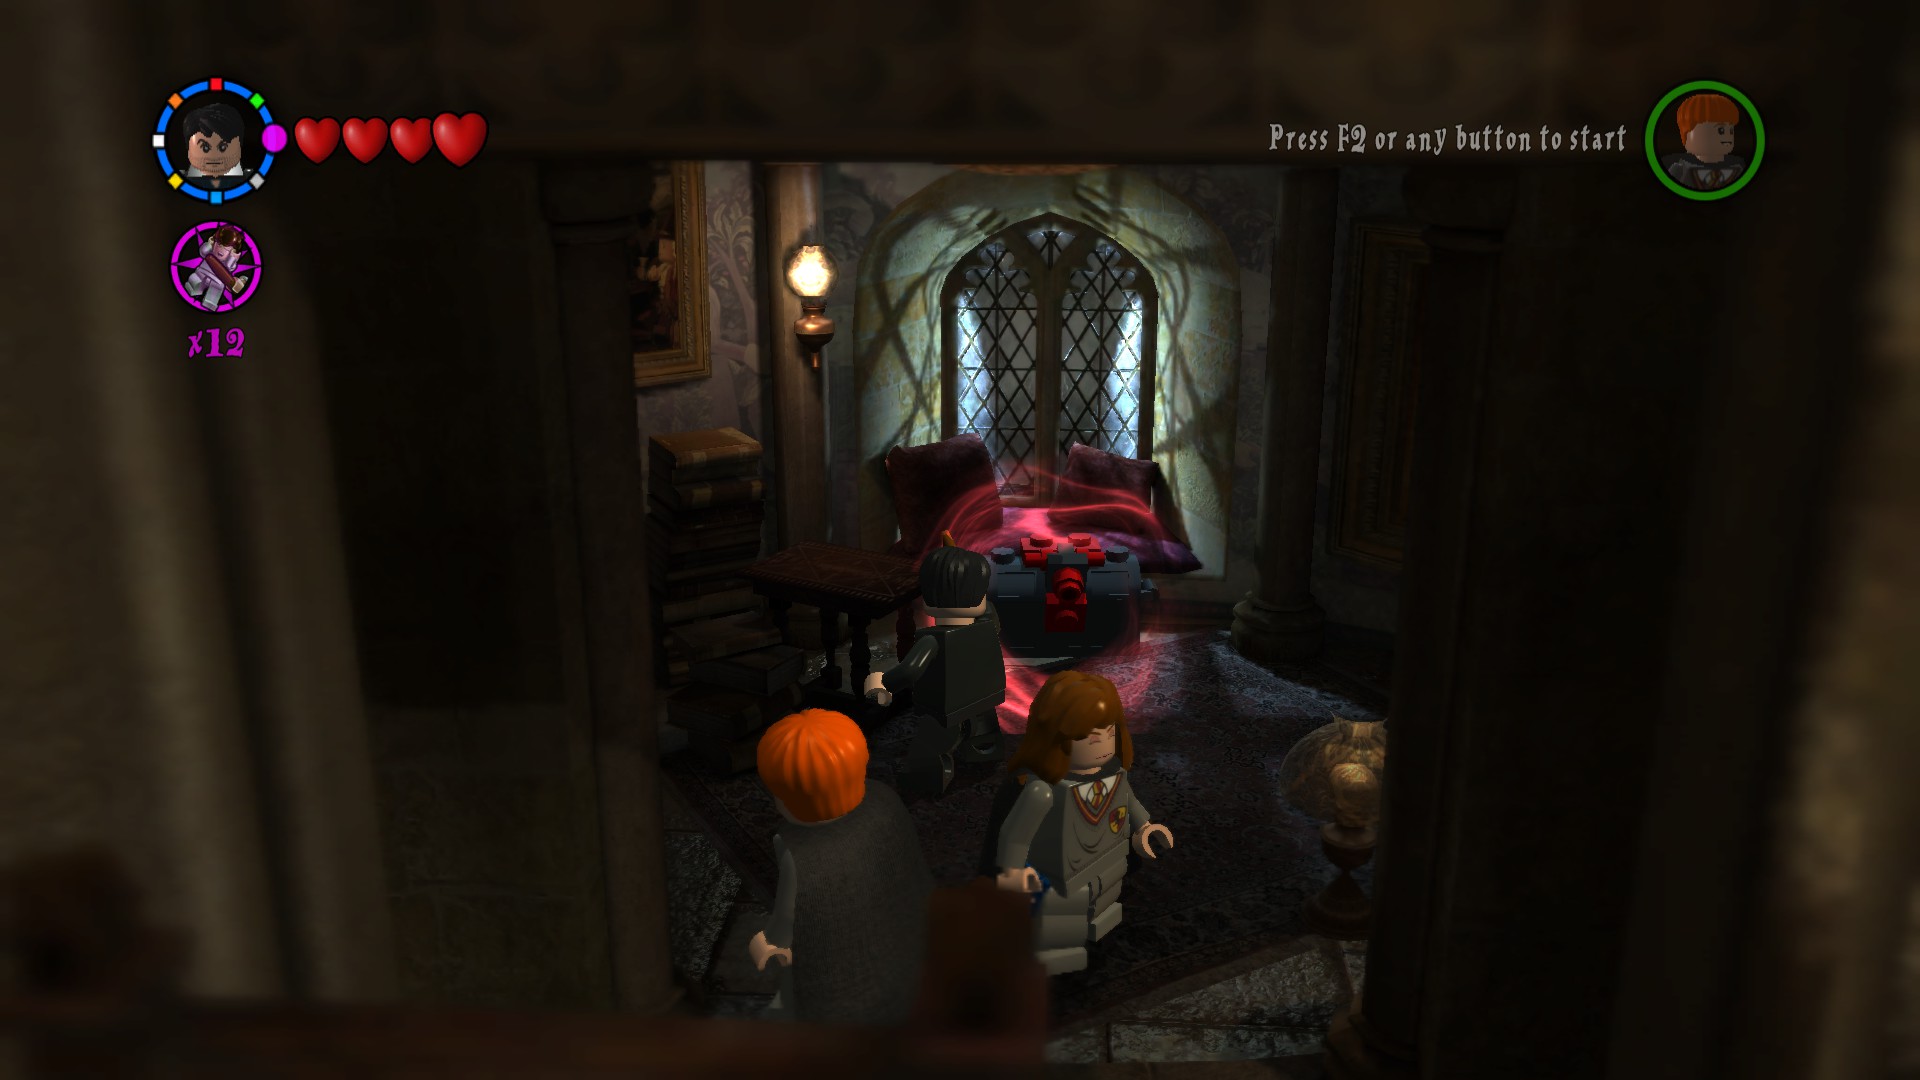 Video Game Review: 'LEGO Harry Potter: Years 1-4' is magical fun